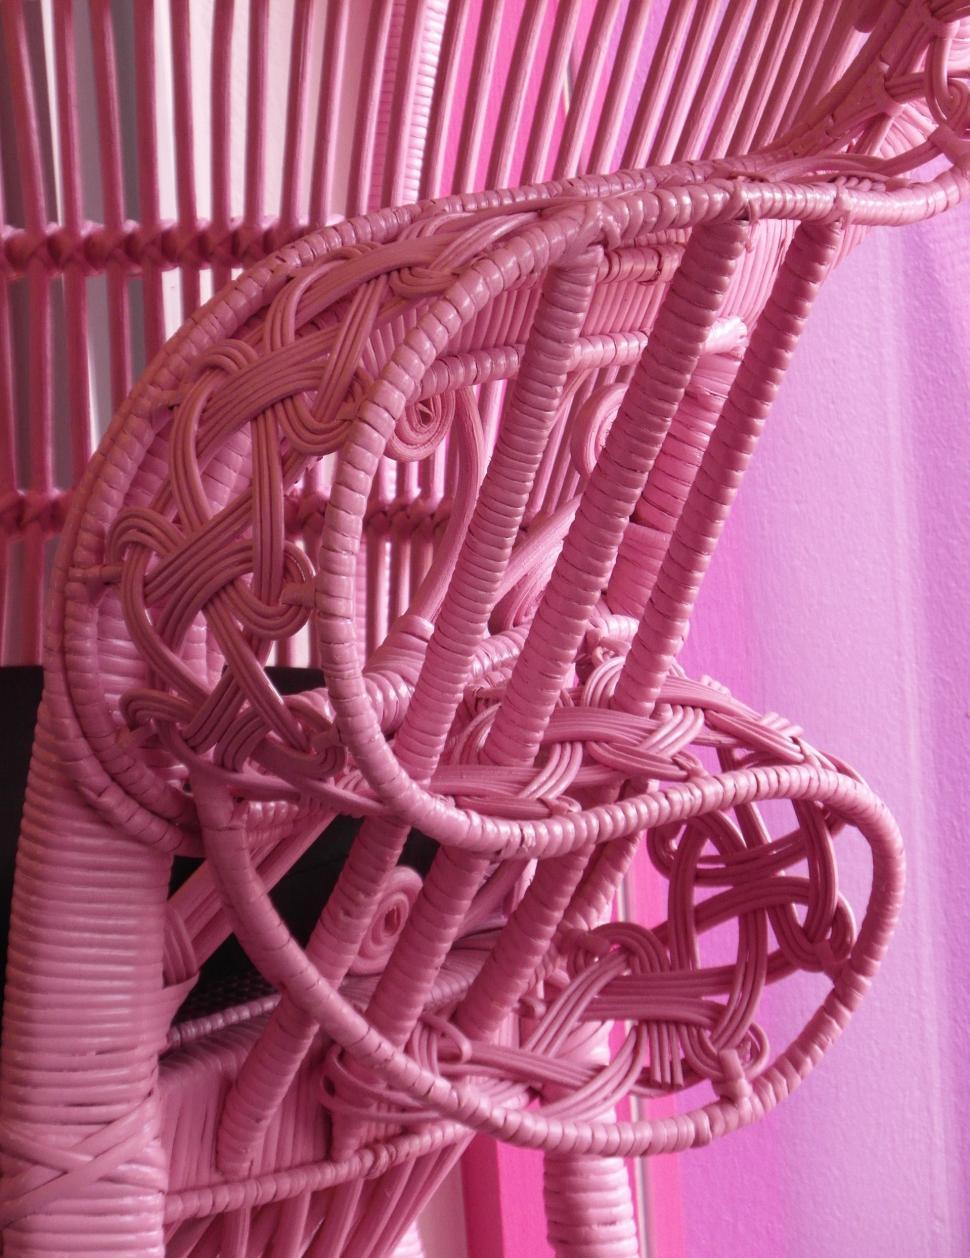 Free Image of Pink Wicker Chair 